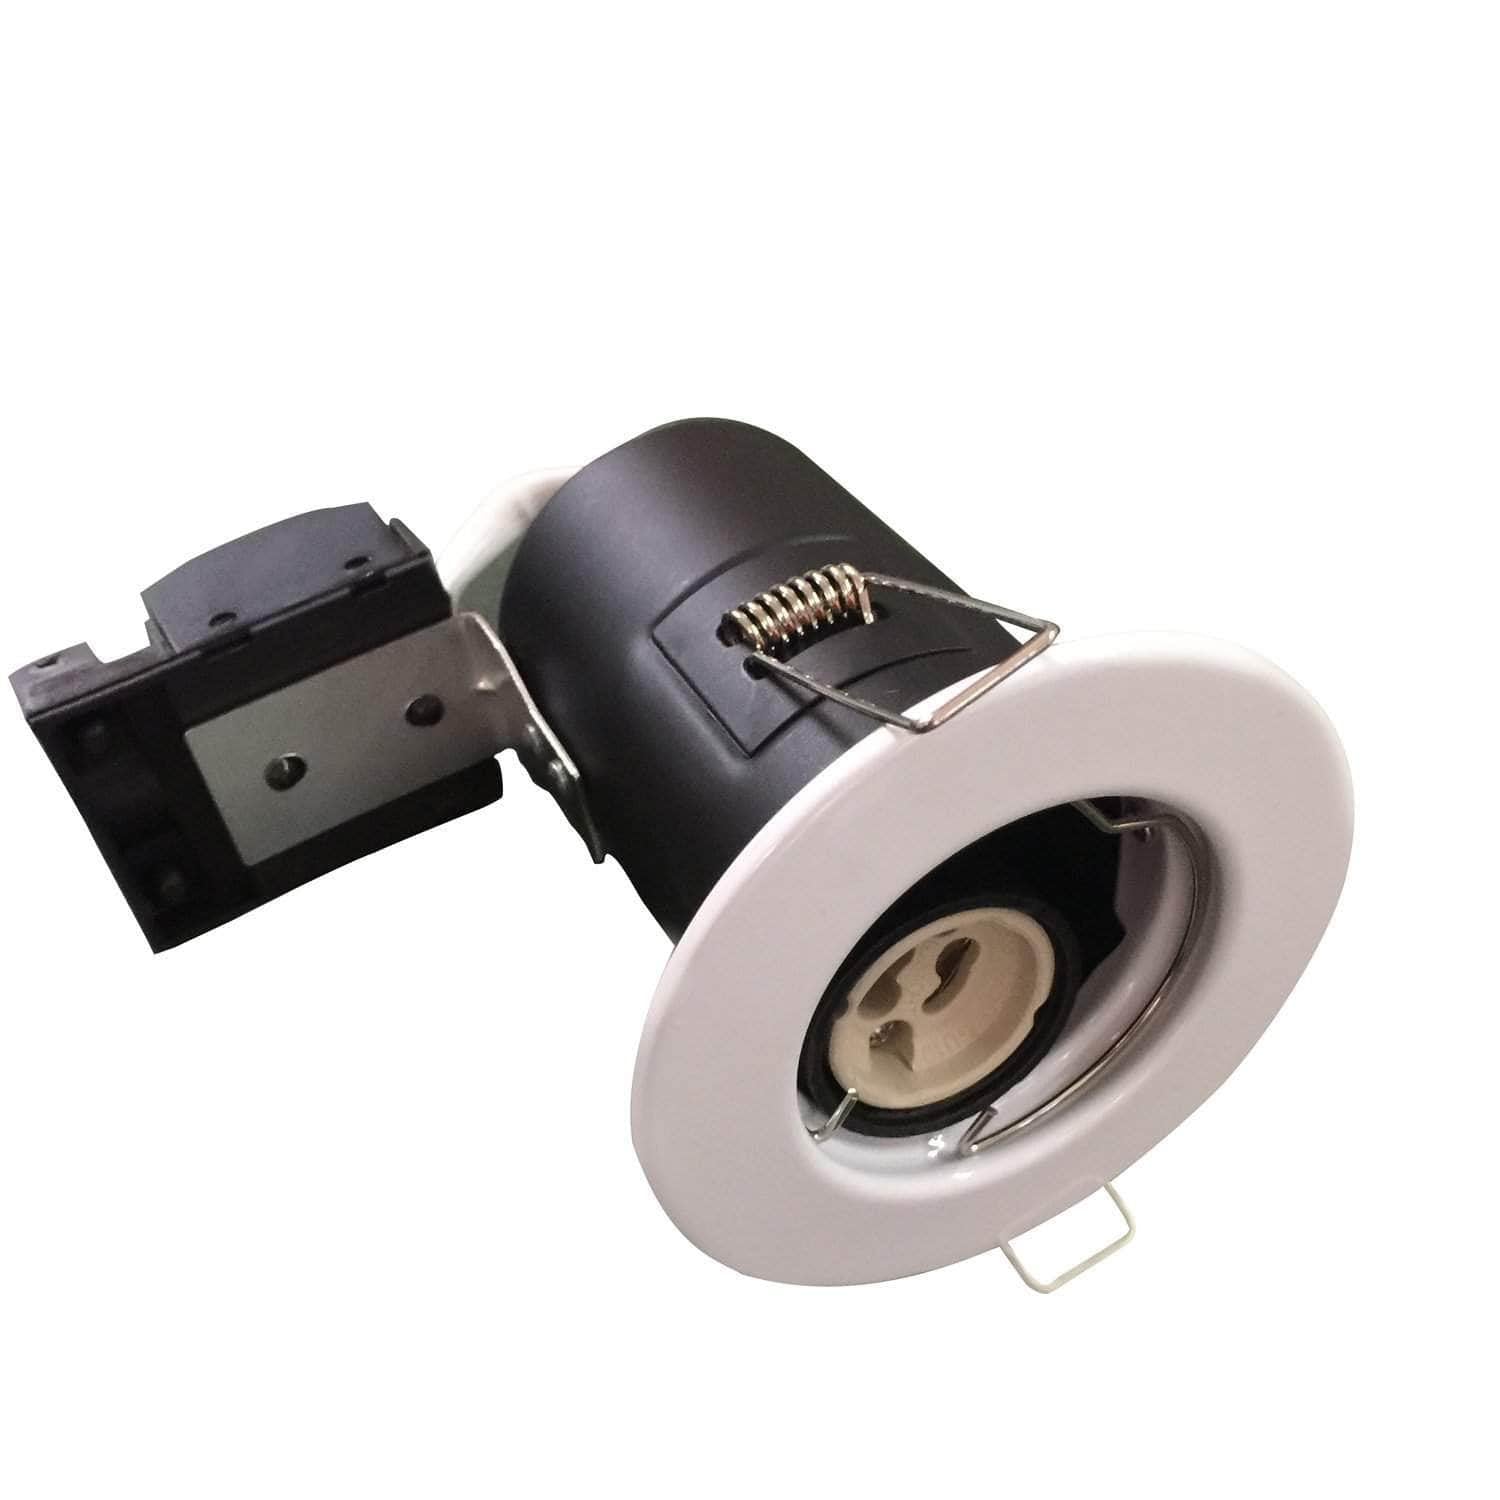 Fire Rated Downlight Housing with GU10 holder, White Ring (Pack of 5 units) - ENER-J Smart Home